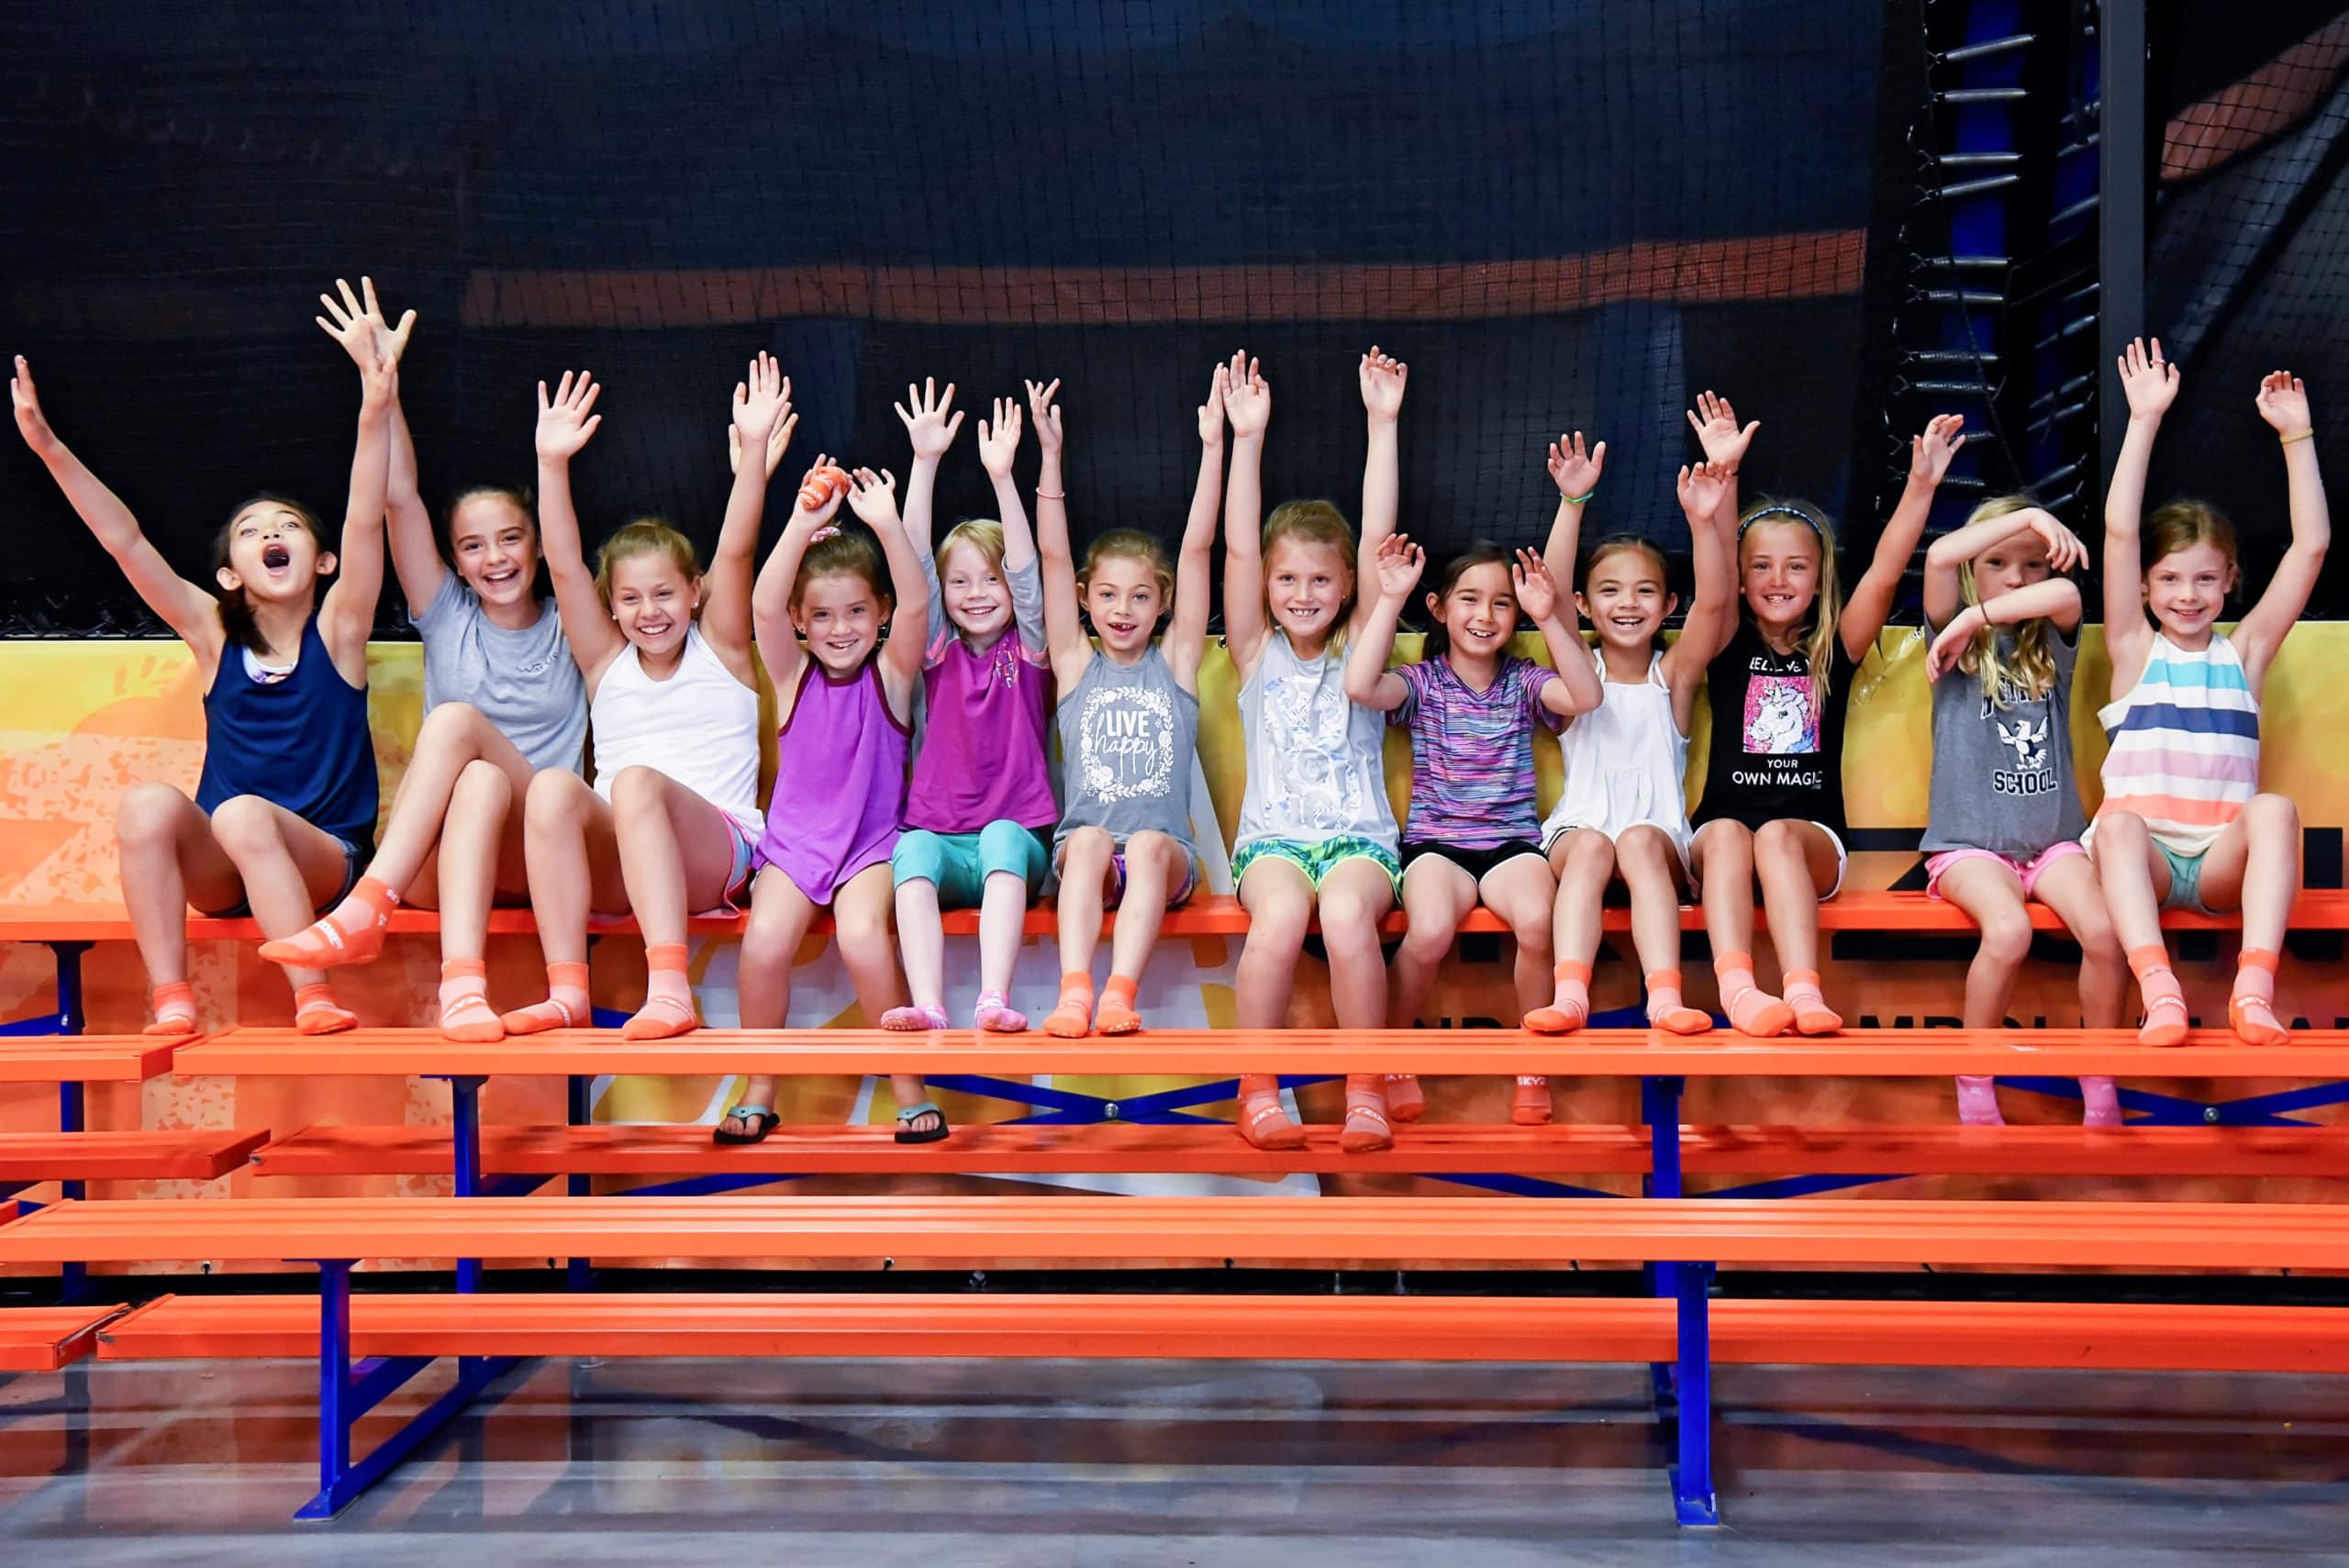 Sky Zone Trampoline Park - All You Need to Know BEFORE You Go (with Photos)